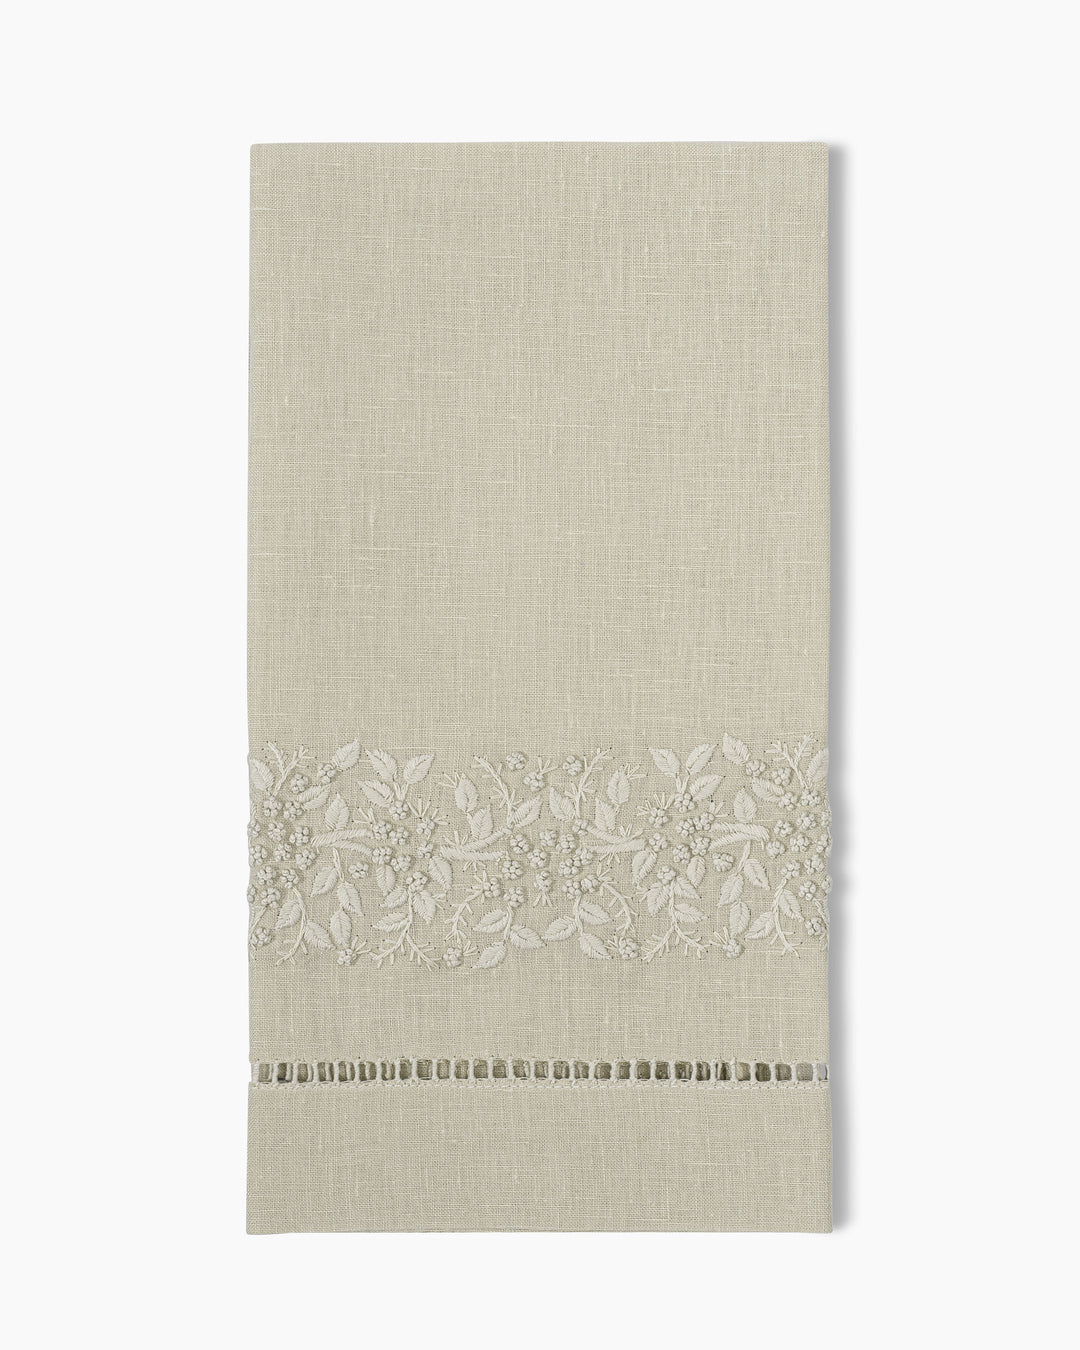 Jardin Monochrome Hand Towels in Taupe, Set of Two